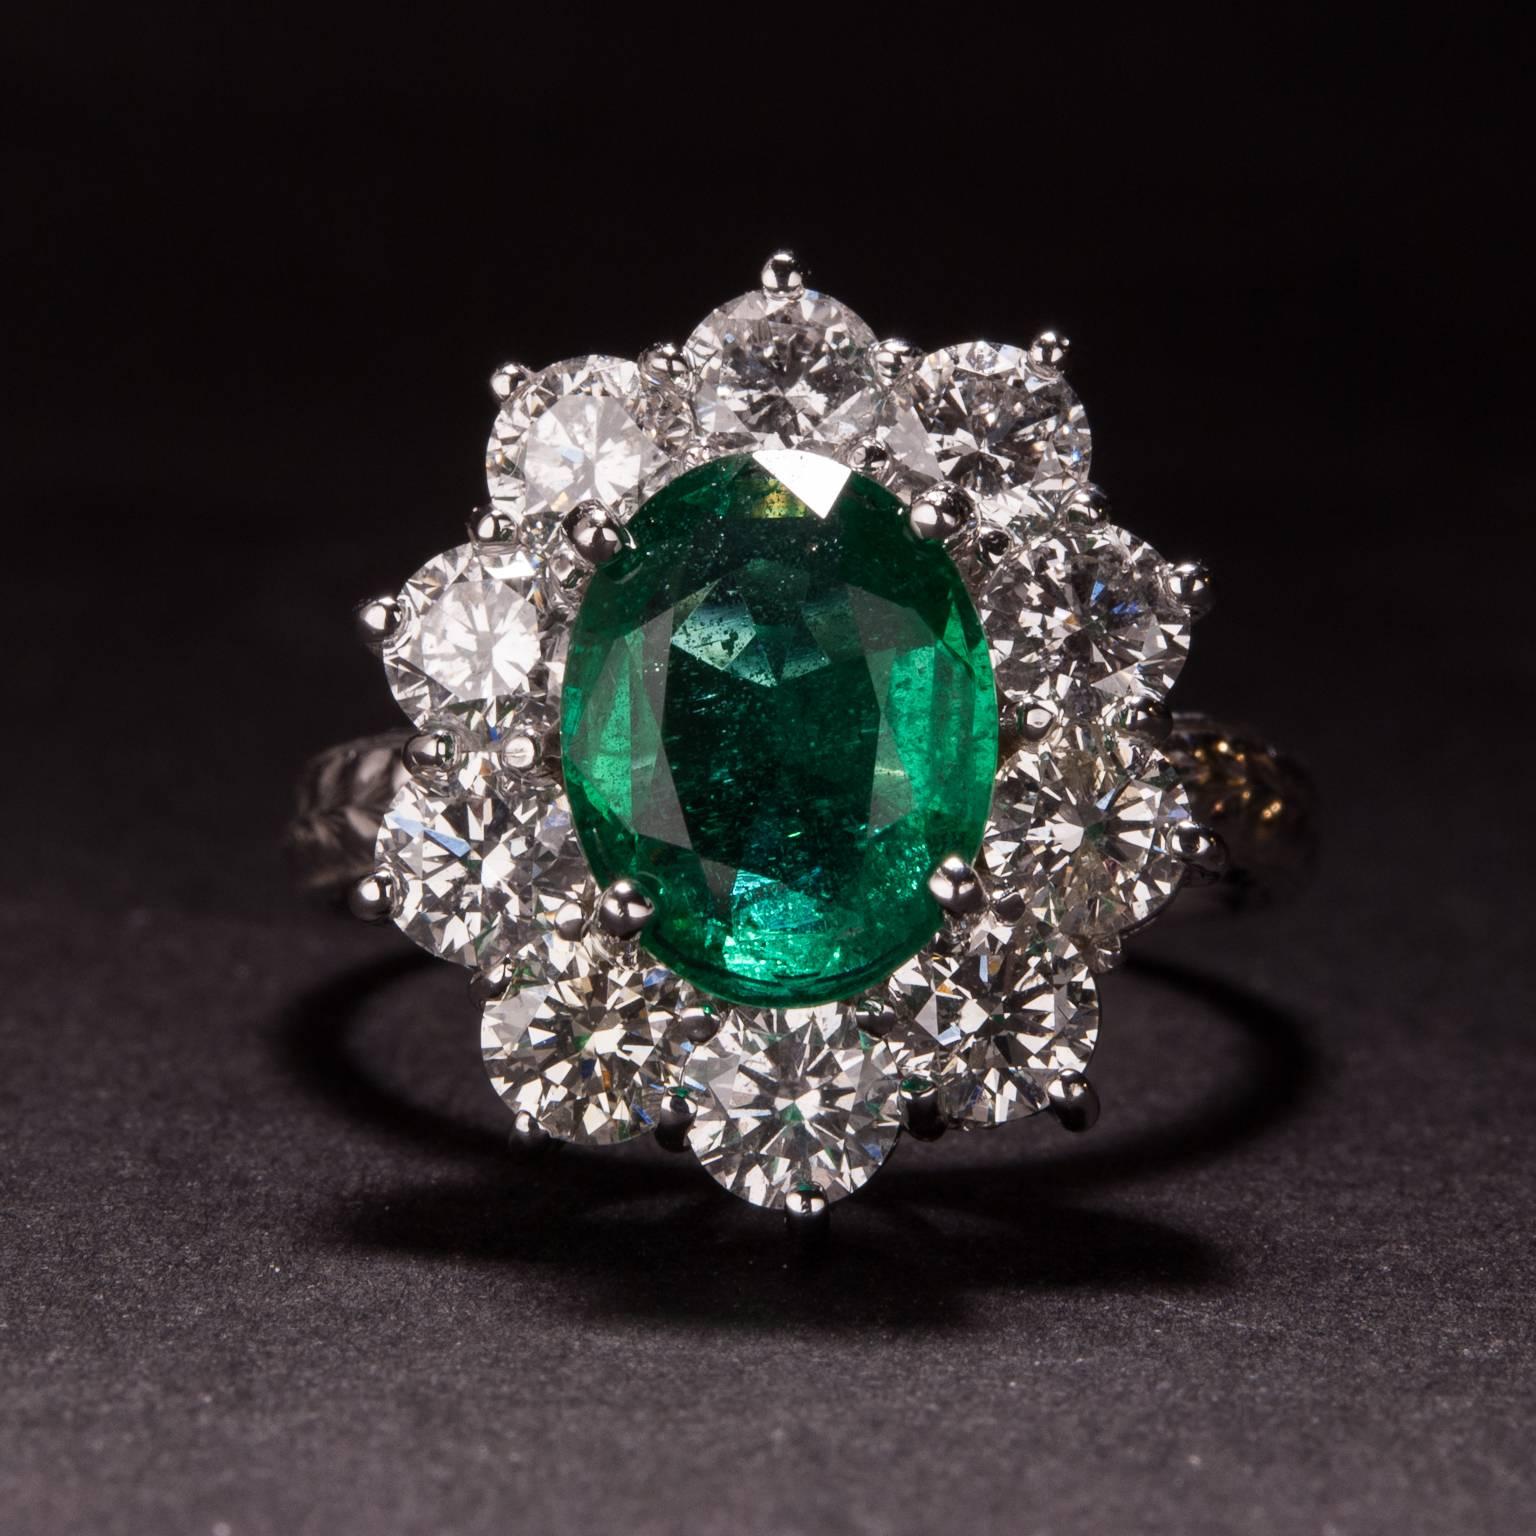 This lovely ring features a 2.68 carat center emerald that is surrounded by 10 accent diamonds weighing a total of 2.01 carats. The 18k white gold mounting has intricate engraved details and is currently size 7.